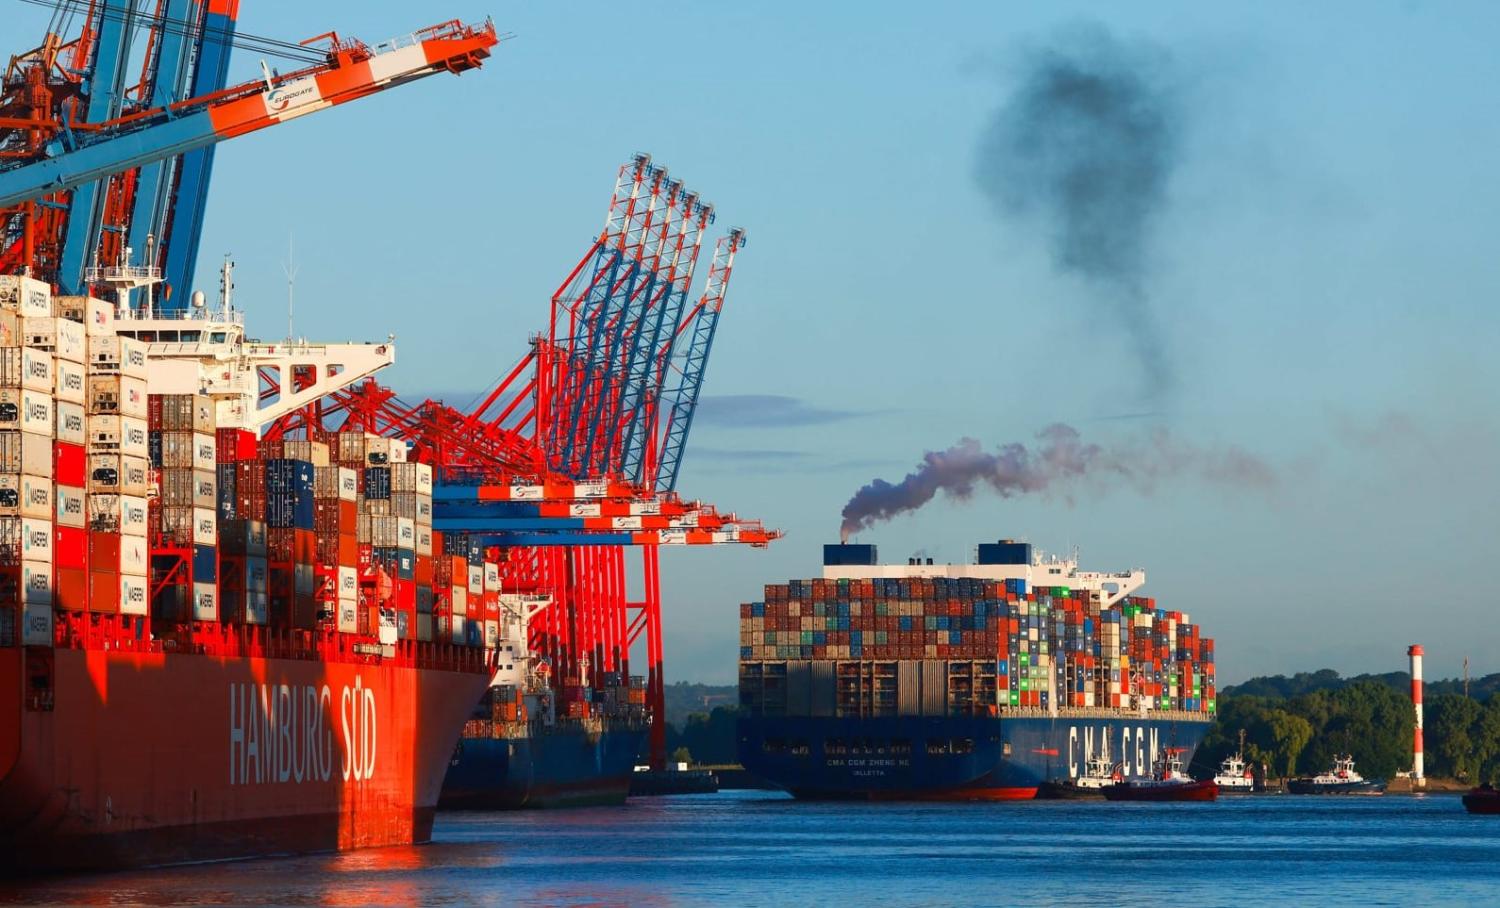 Shipping contributes an estimated 3% of global emissions, more than that from Japan (Christian Charisius via Getty Images)